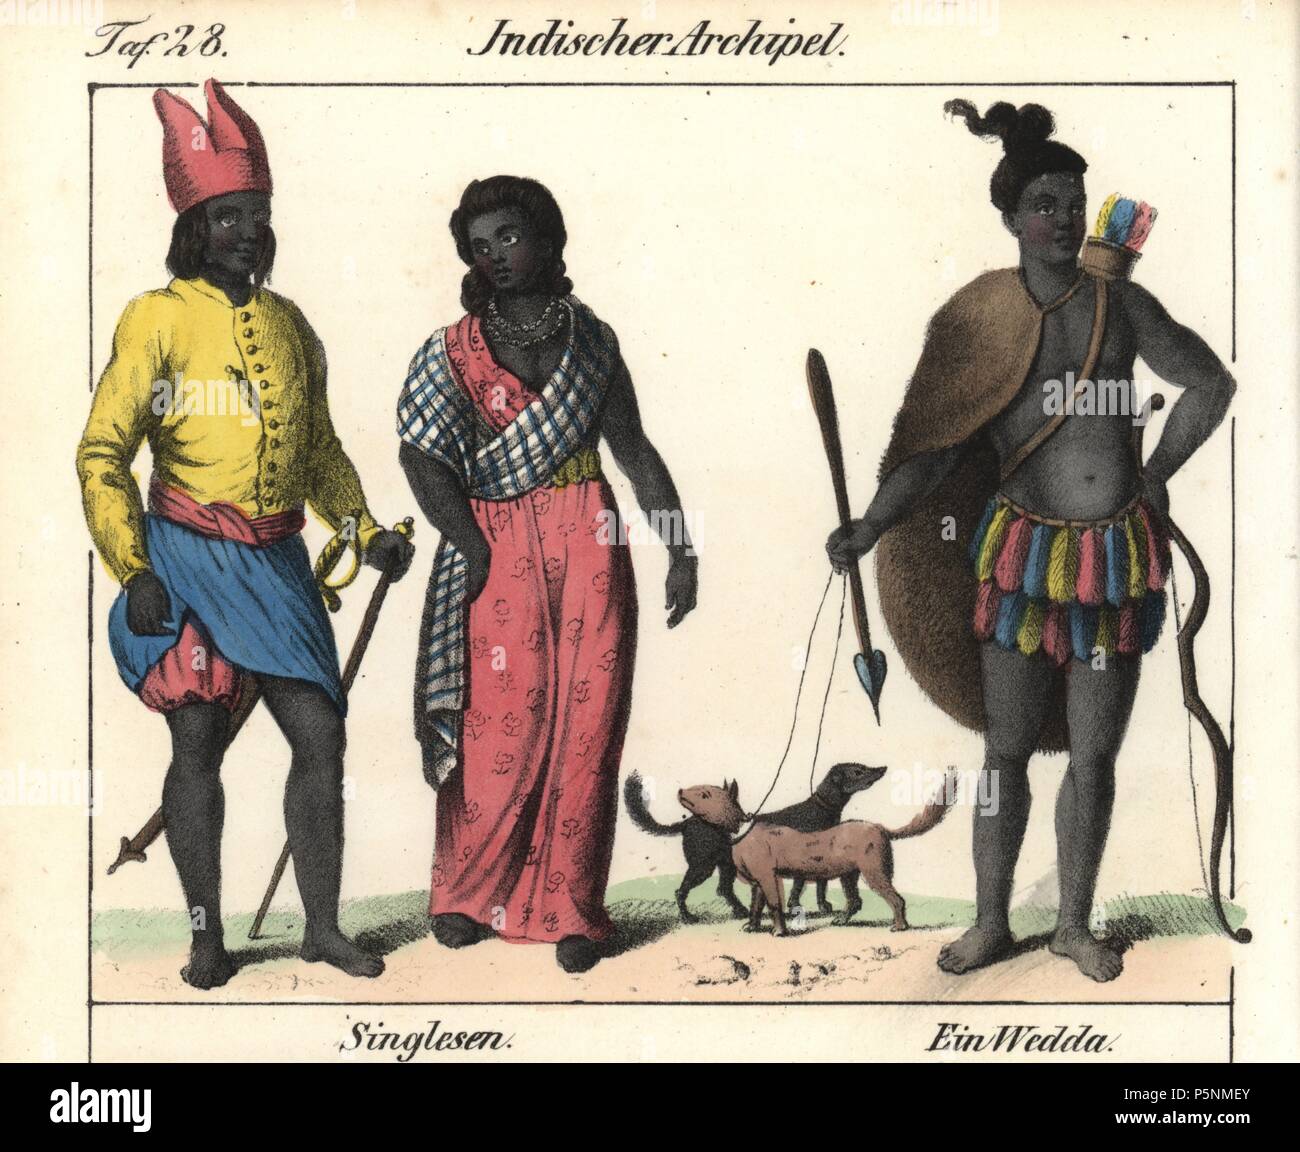 Costumes of the natives of Ceylon (Sri Lanka): Sinhalese man with sword and cane, and indigenous Vedda man with feather skirt, bow and arrows, fur cape, and two dogs on leashes. Handcoloured lithograph from Friedrich Wilhelm Goedsche's 'Vollstaendige Völkergallerie in getreuen Abbildungen' (Complete Gallery of Peoples in True Pictures), Meissen, circa 1835-1840. Goedsche (1785-1863) was a German writer, bookseller and publisher in Meissen. Many of the illustrations were adapted from Bertuch's 'Bilderbuch fur Kinder' and others. Stock Photo